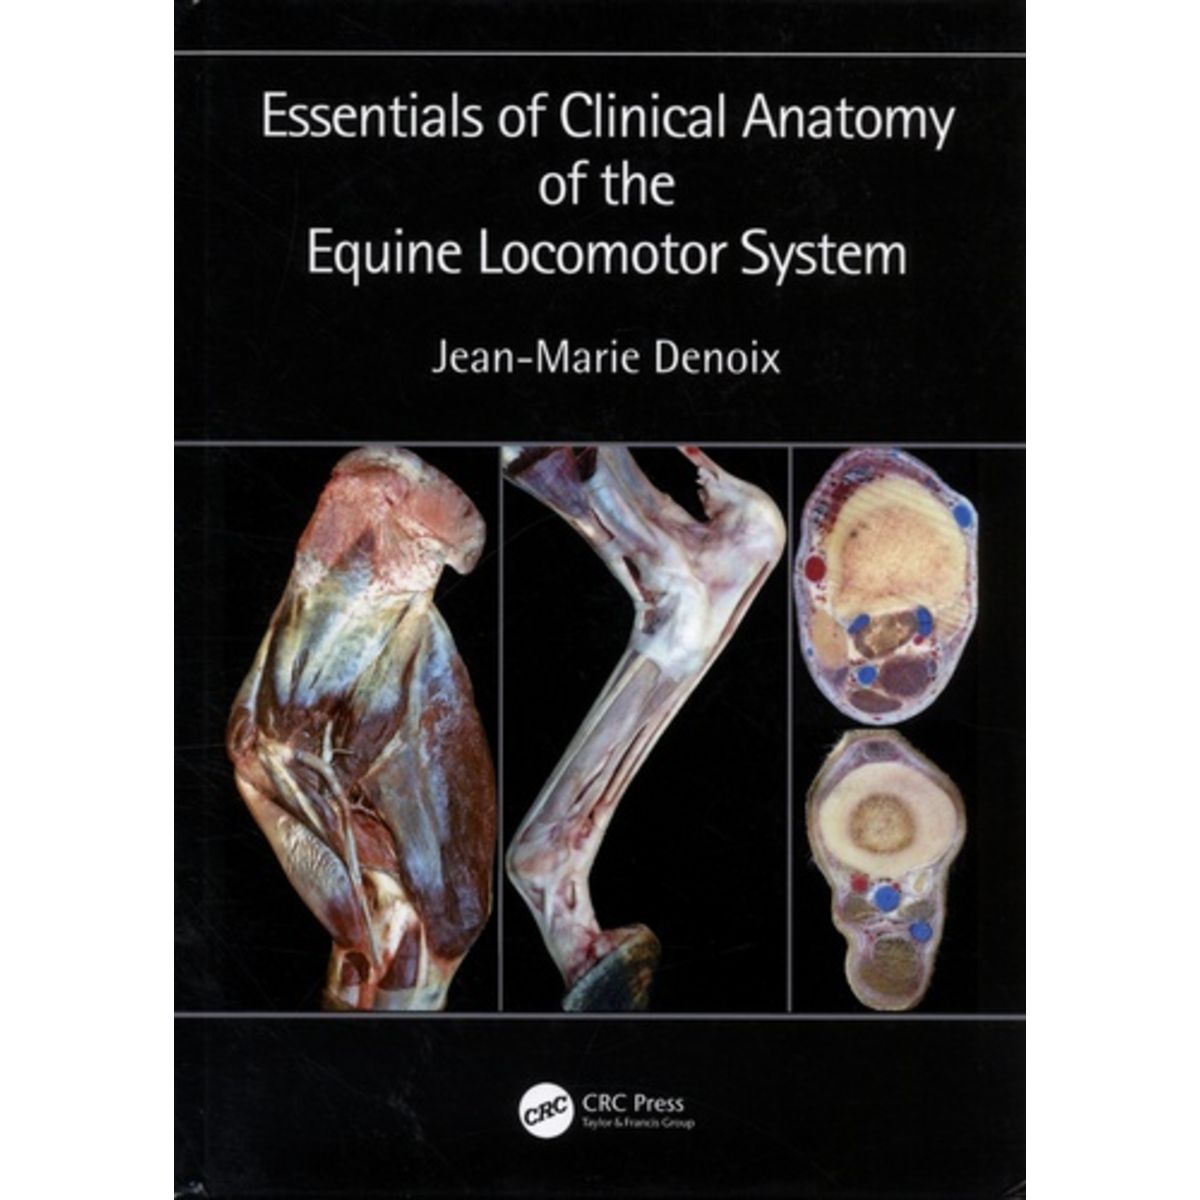  ESSENTIALS OF CLINICAL ANATOMY OF THE EQUINE LOCOMOTOR SYSTEM. EDITION EN ANGLAIS, Denoix Jean-Marie